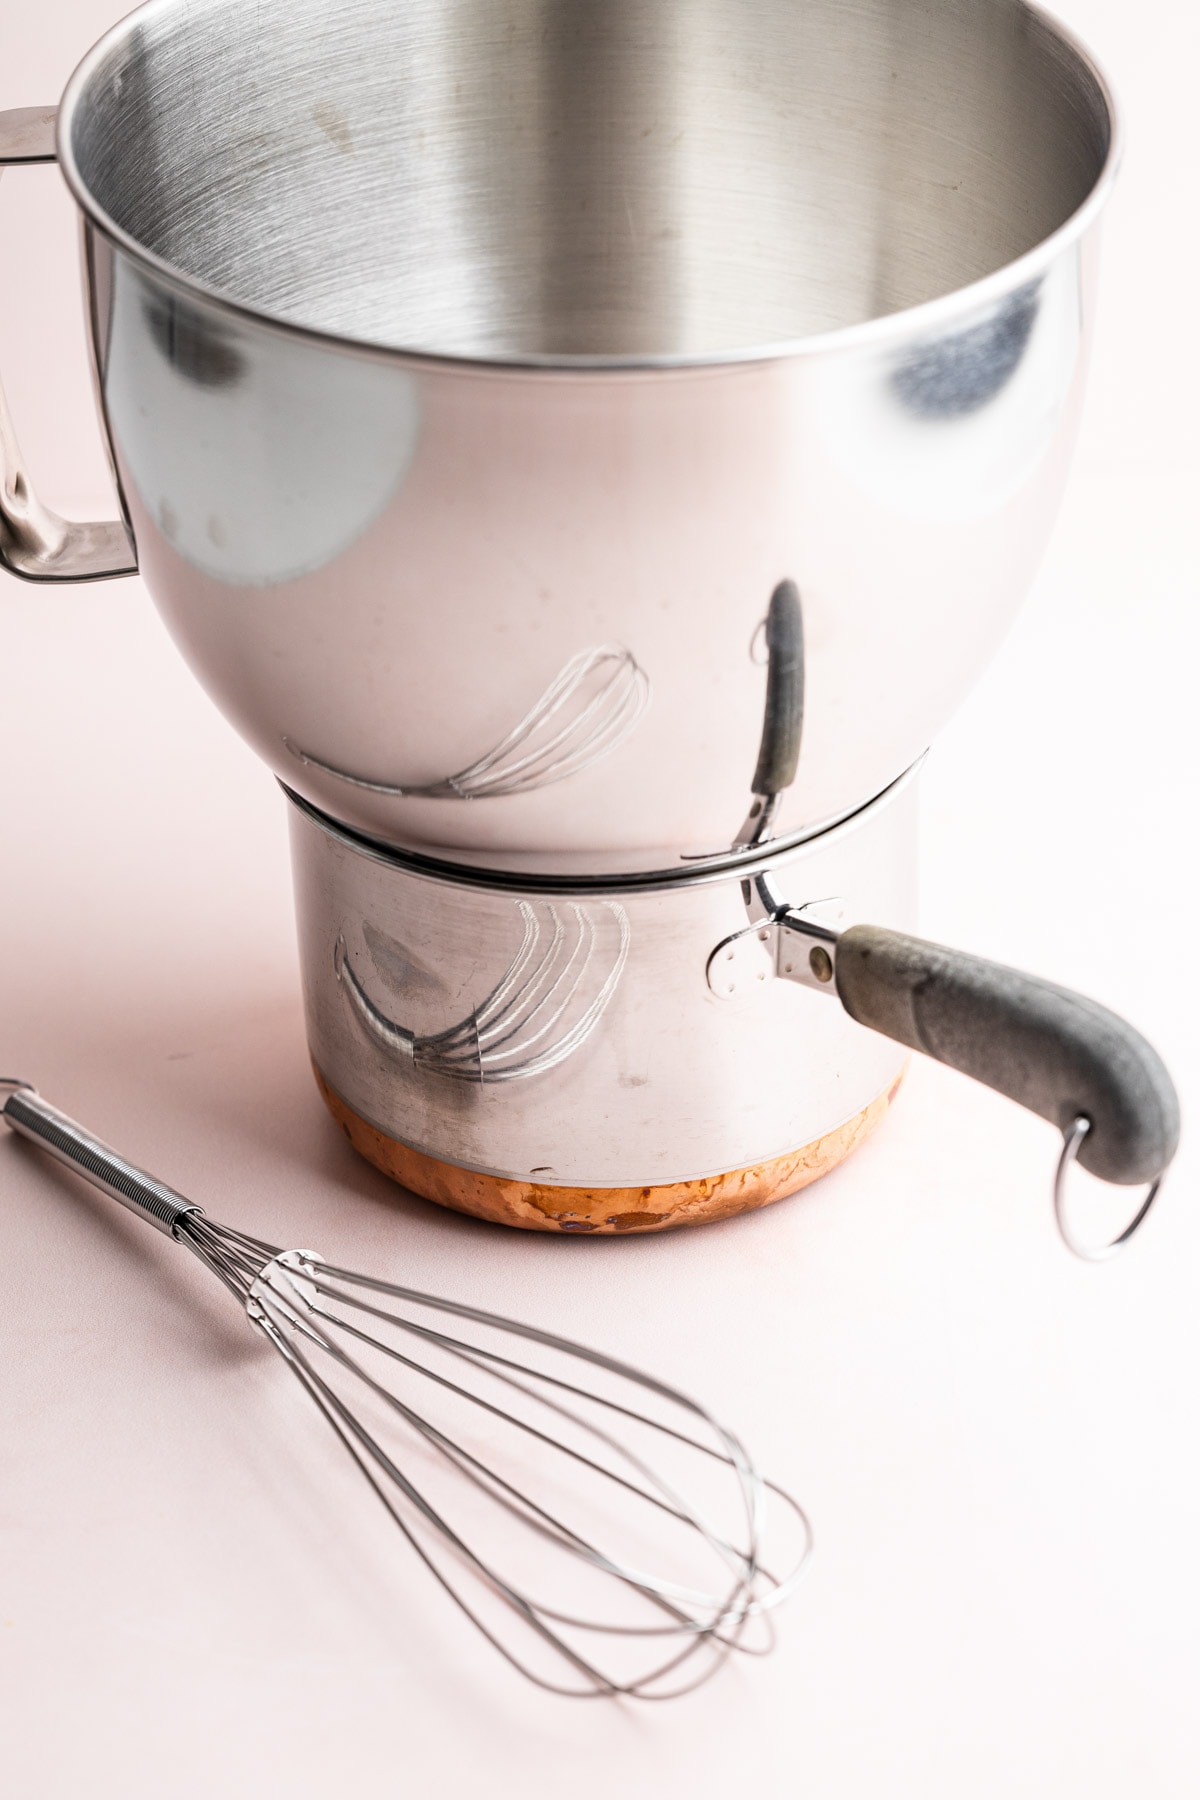 A kitchen aid mixing stainless steel mixing bowl on top of a small pot.